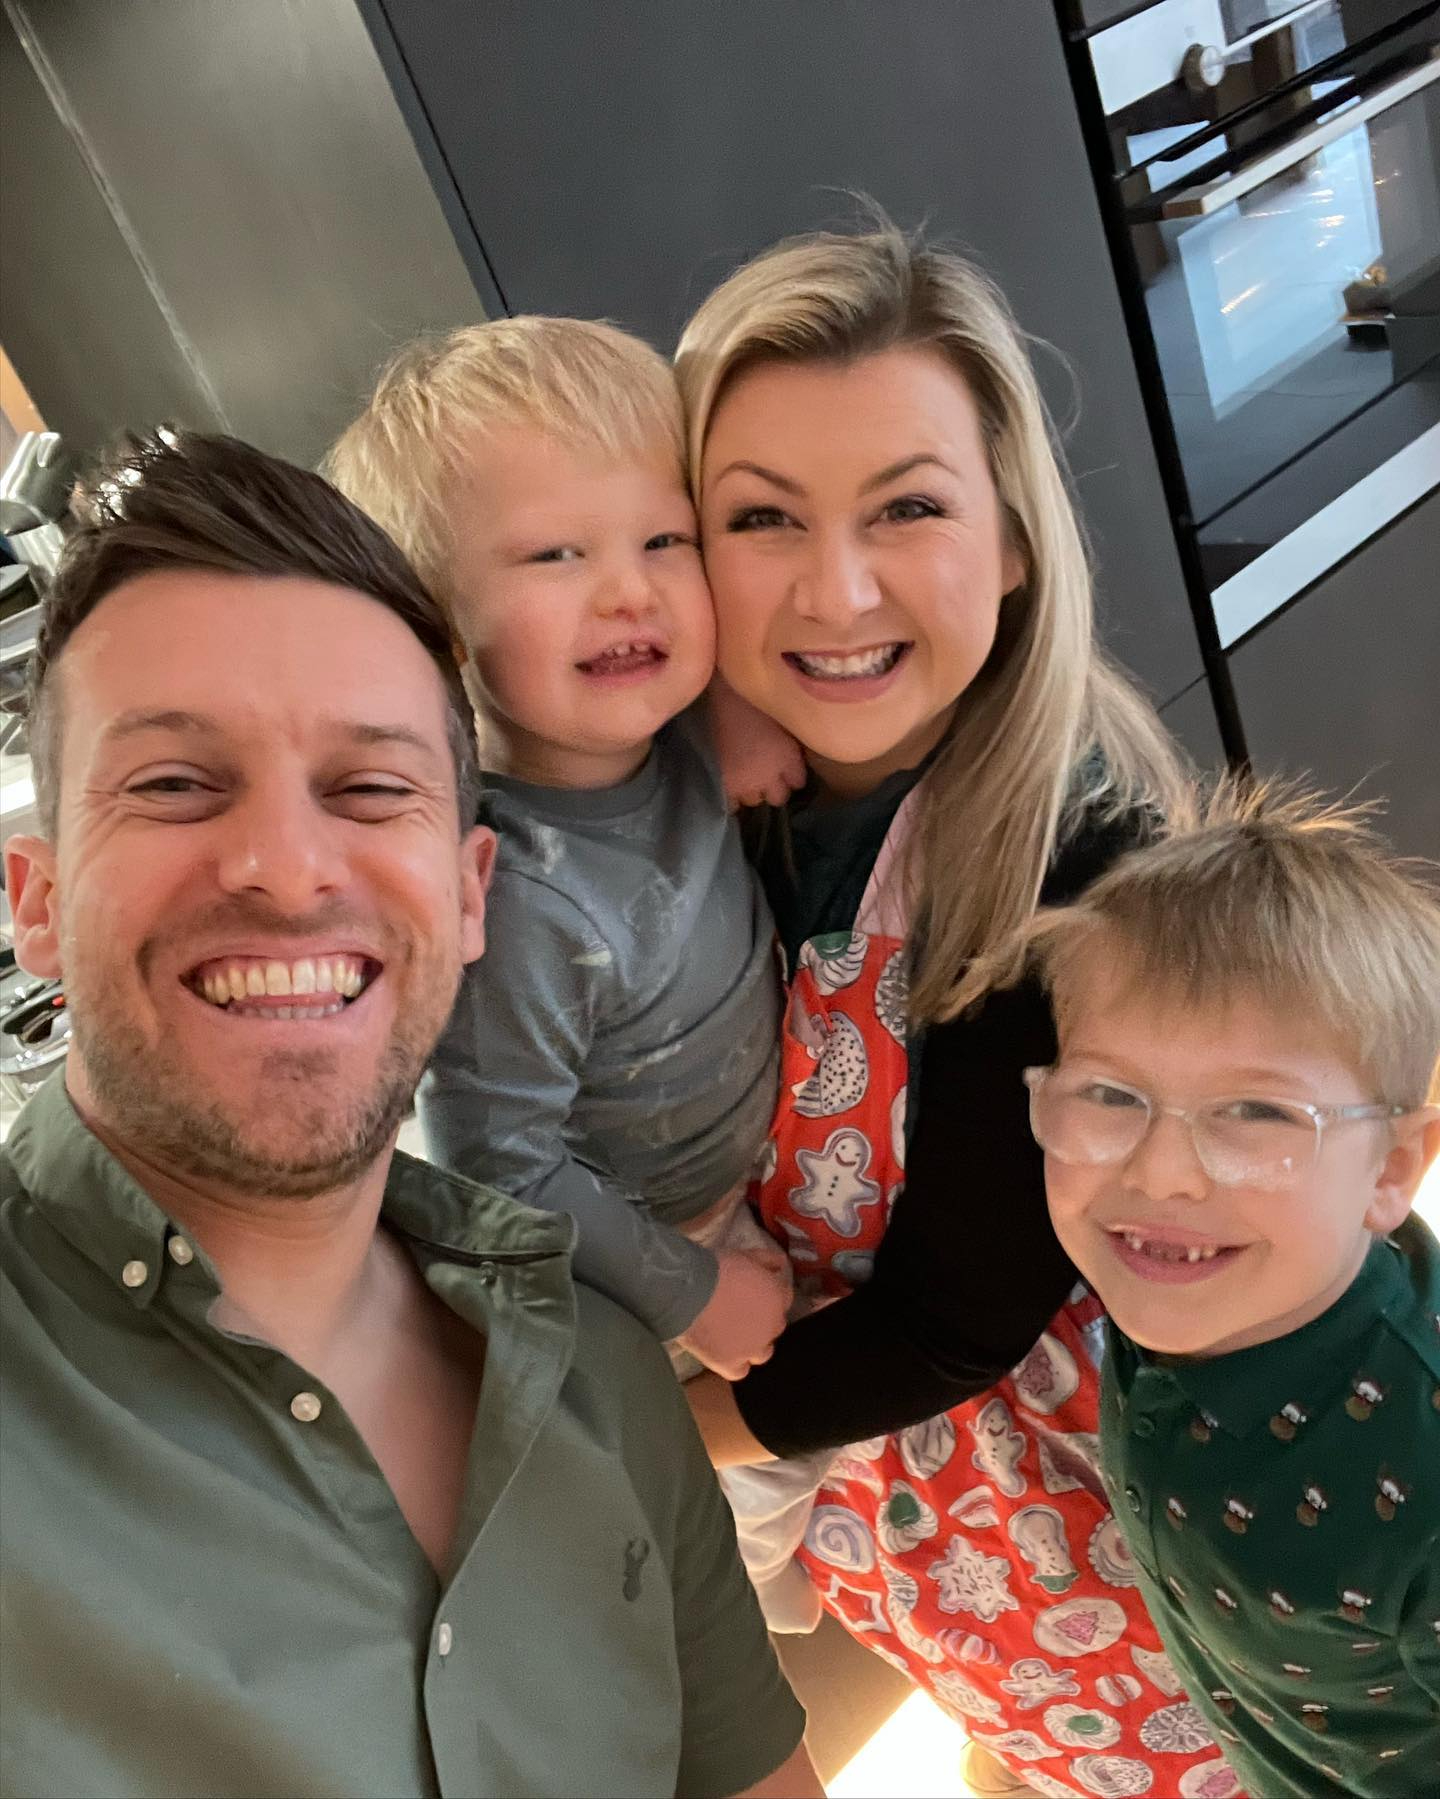 The family of four were all smiles this Christmas